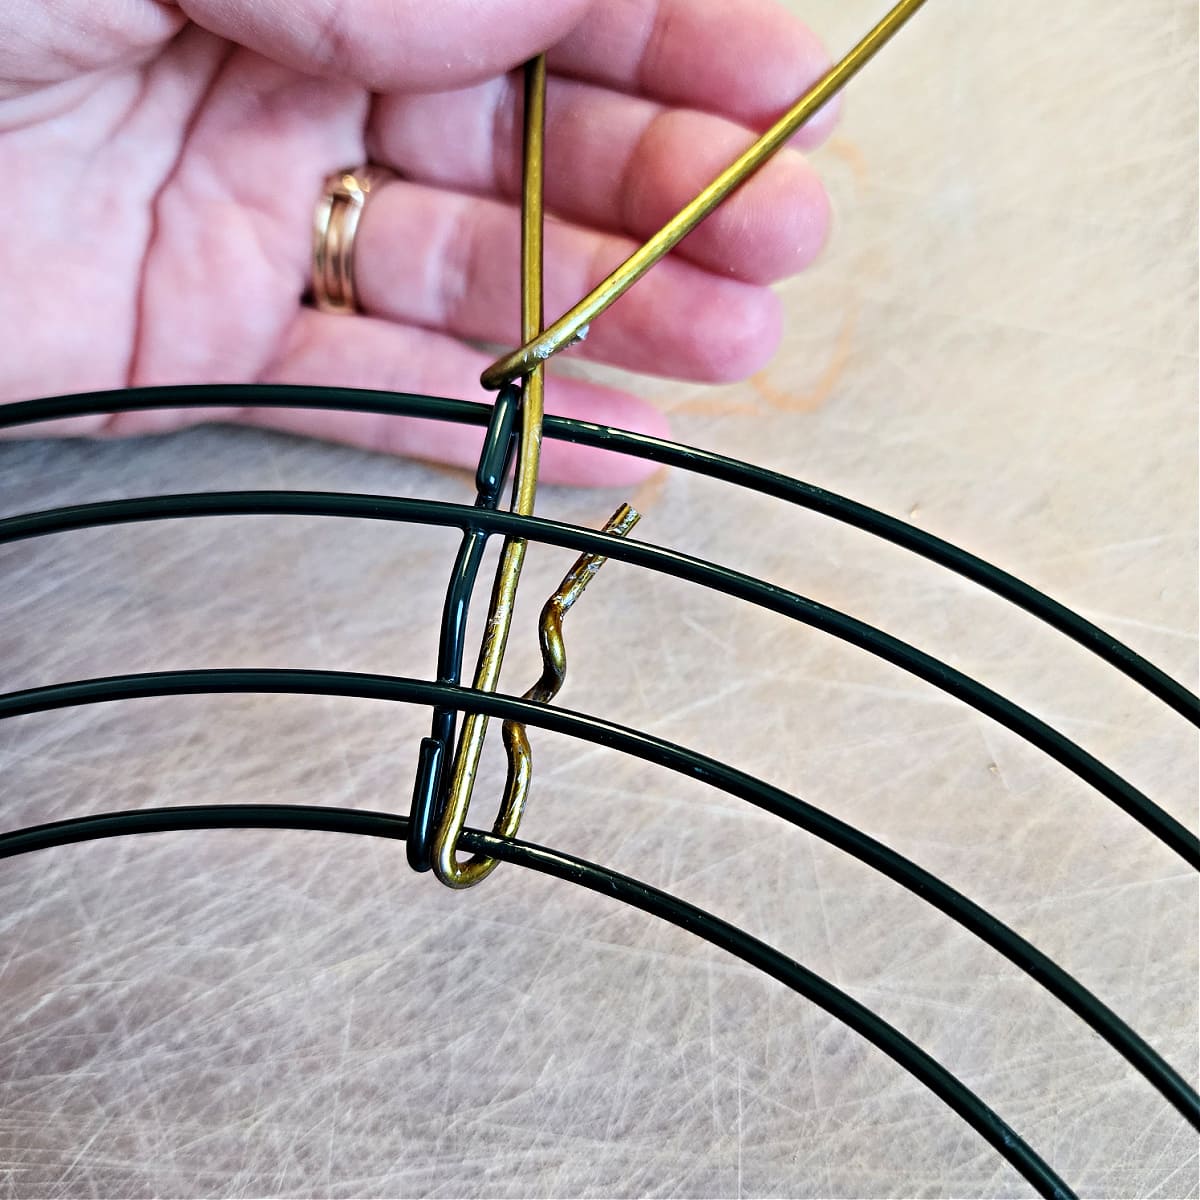 Bend straight end of bunny ear up around wire wreath form to secure it.